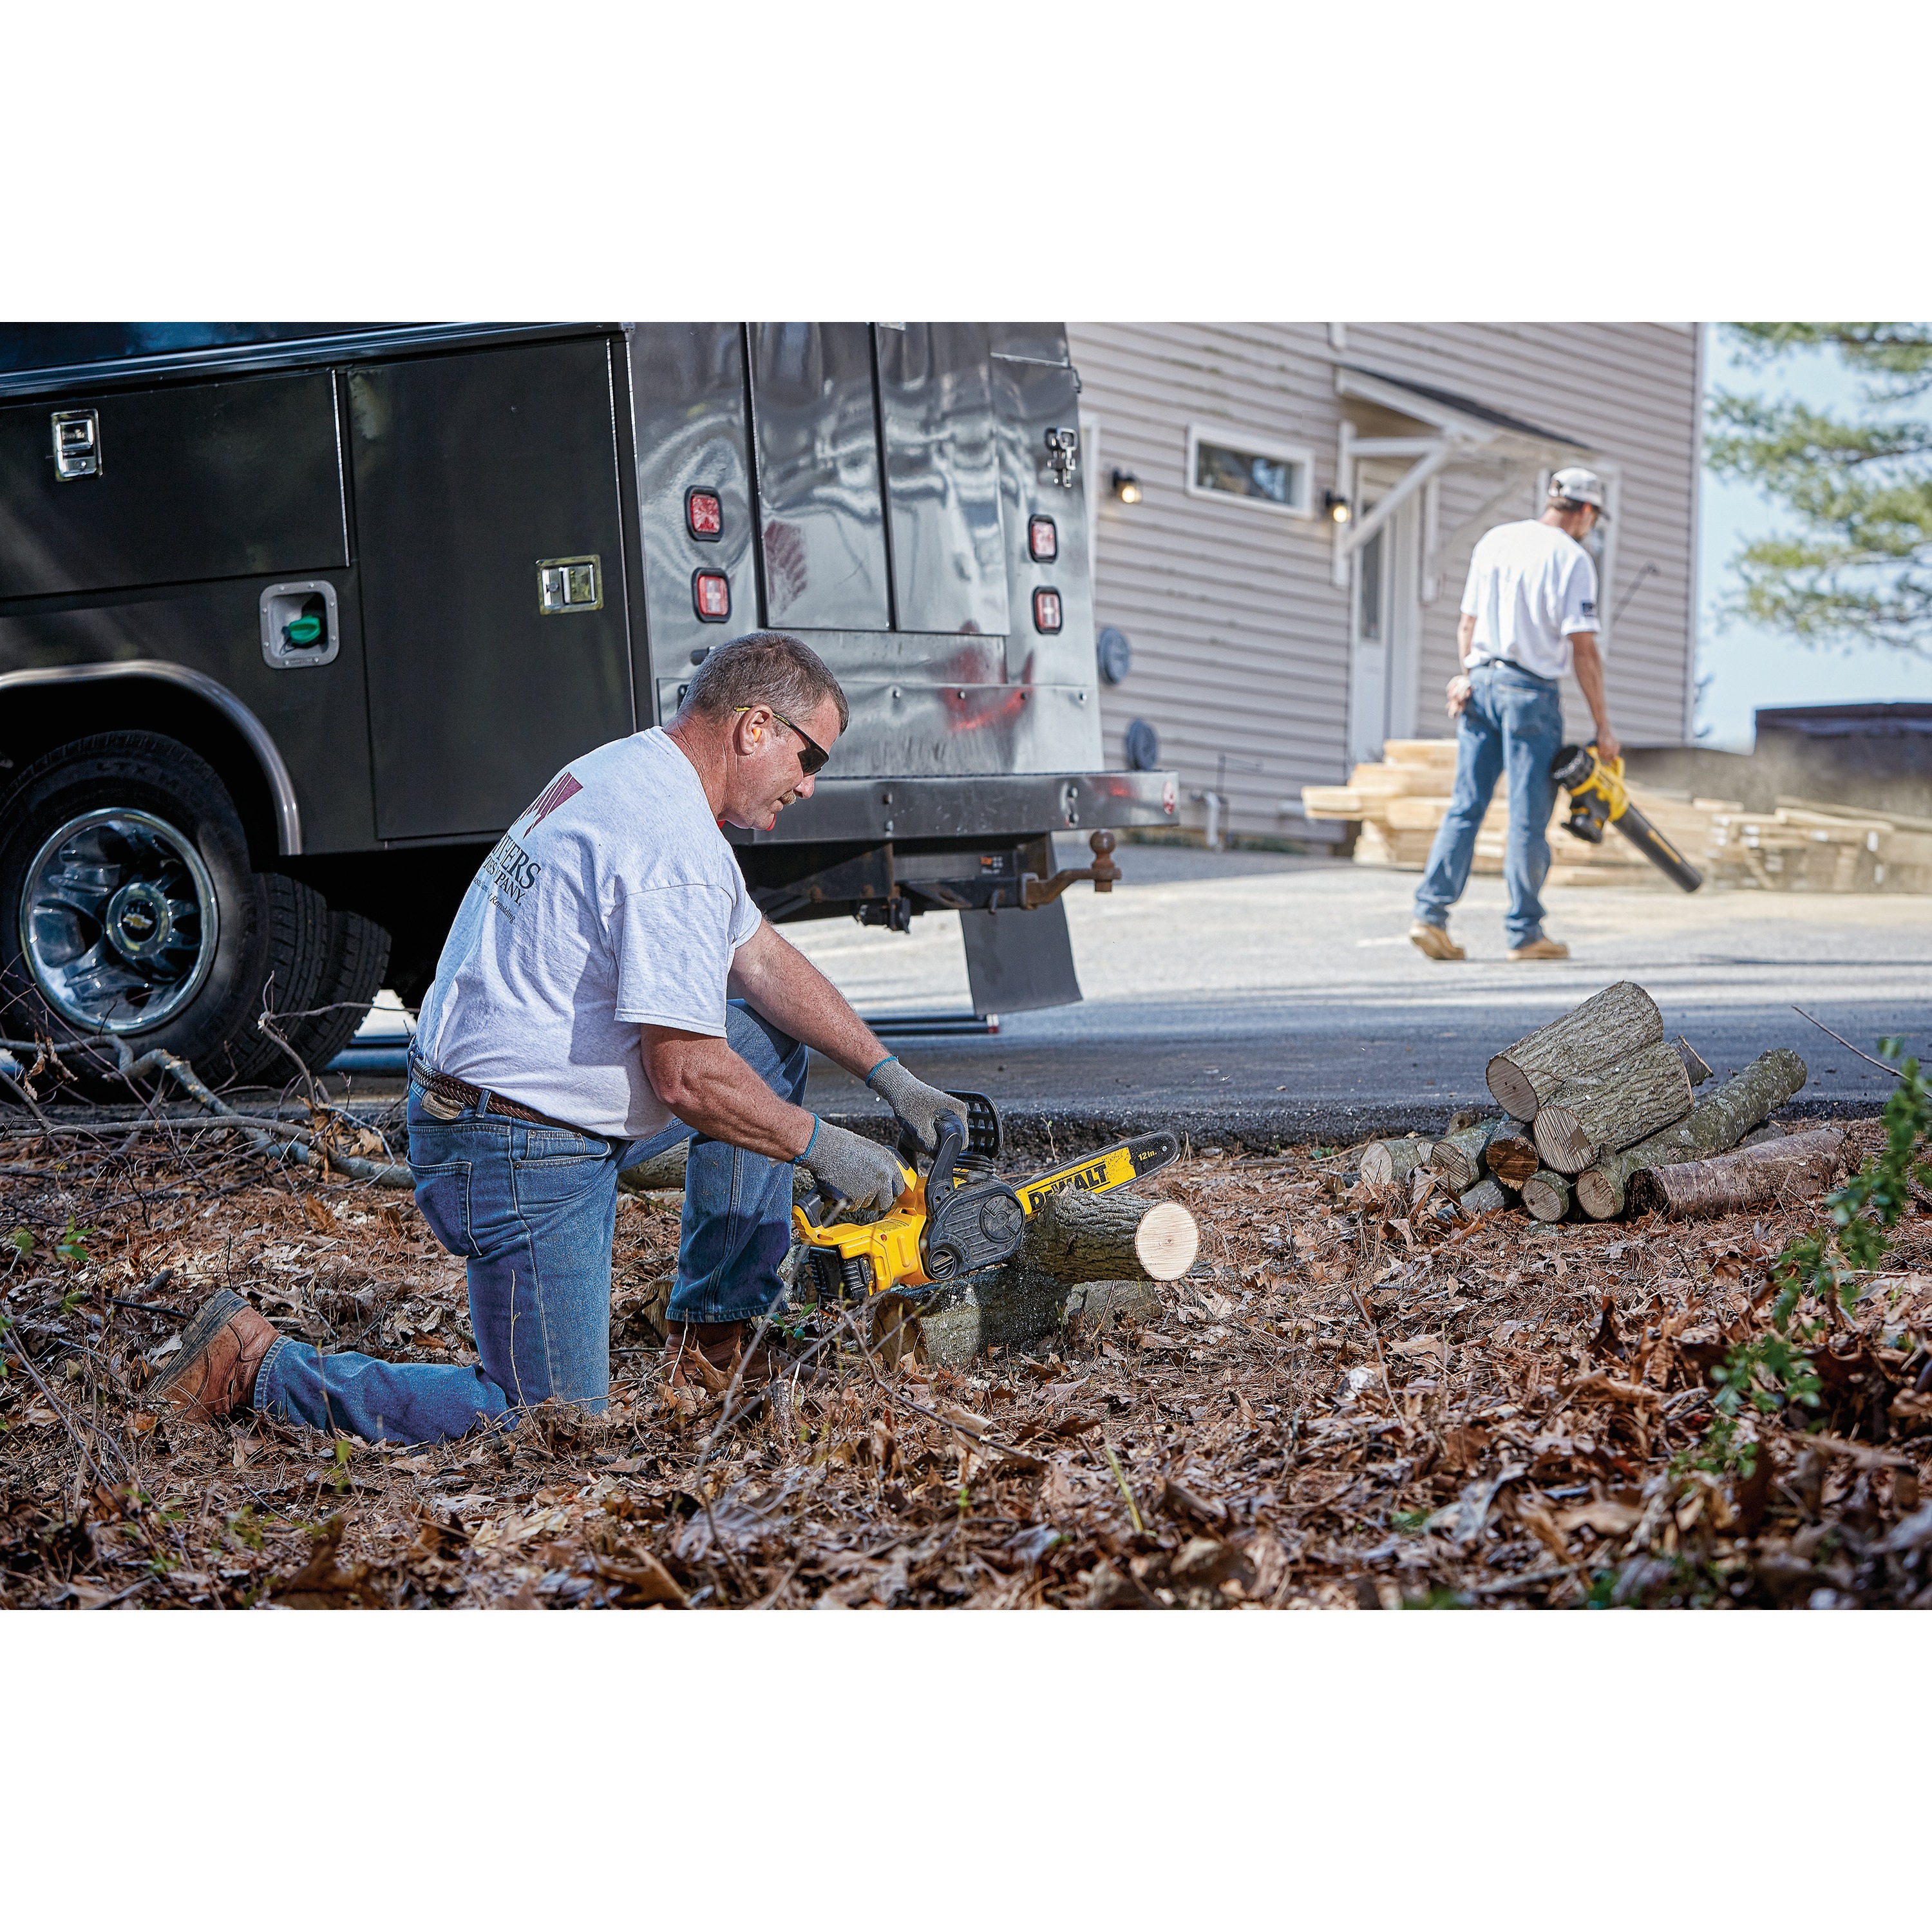 XR® Compact 12 inch Cordless Chainsaw being used by a worker to cut through trimmed tree logs at worksite